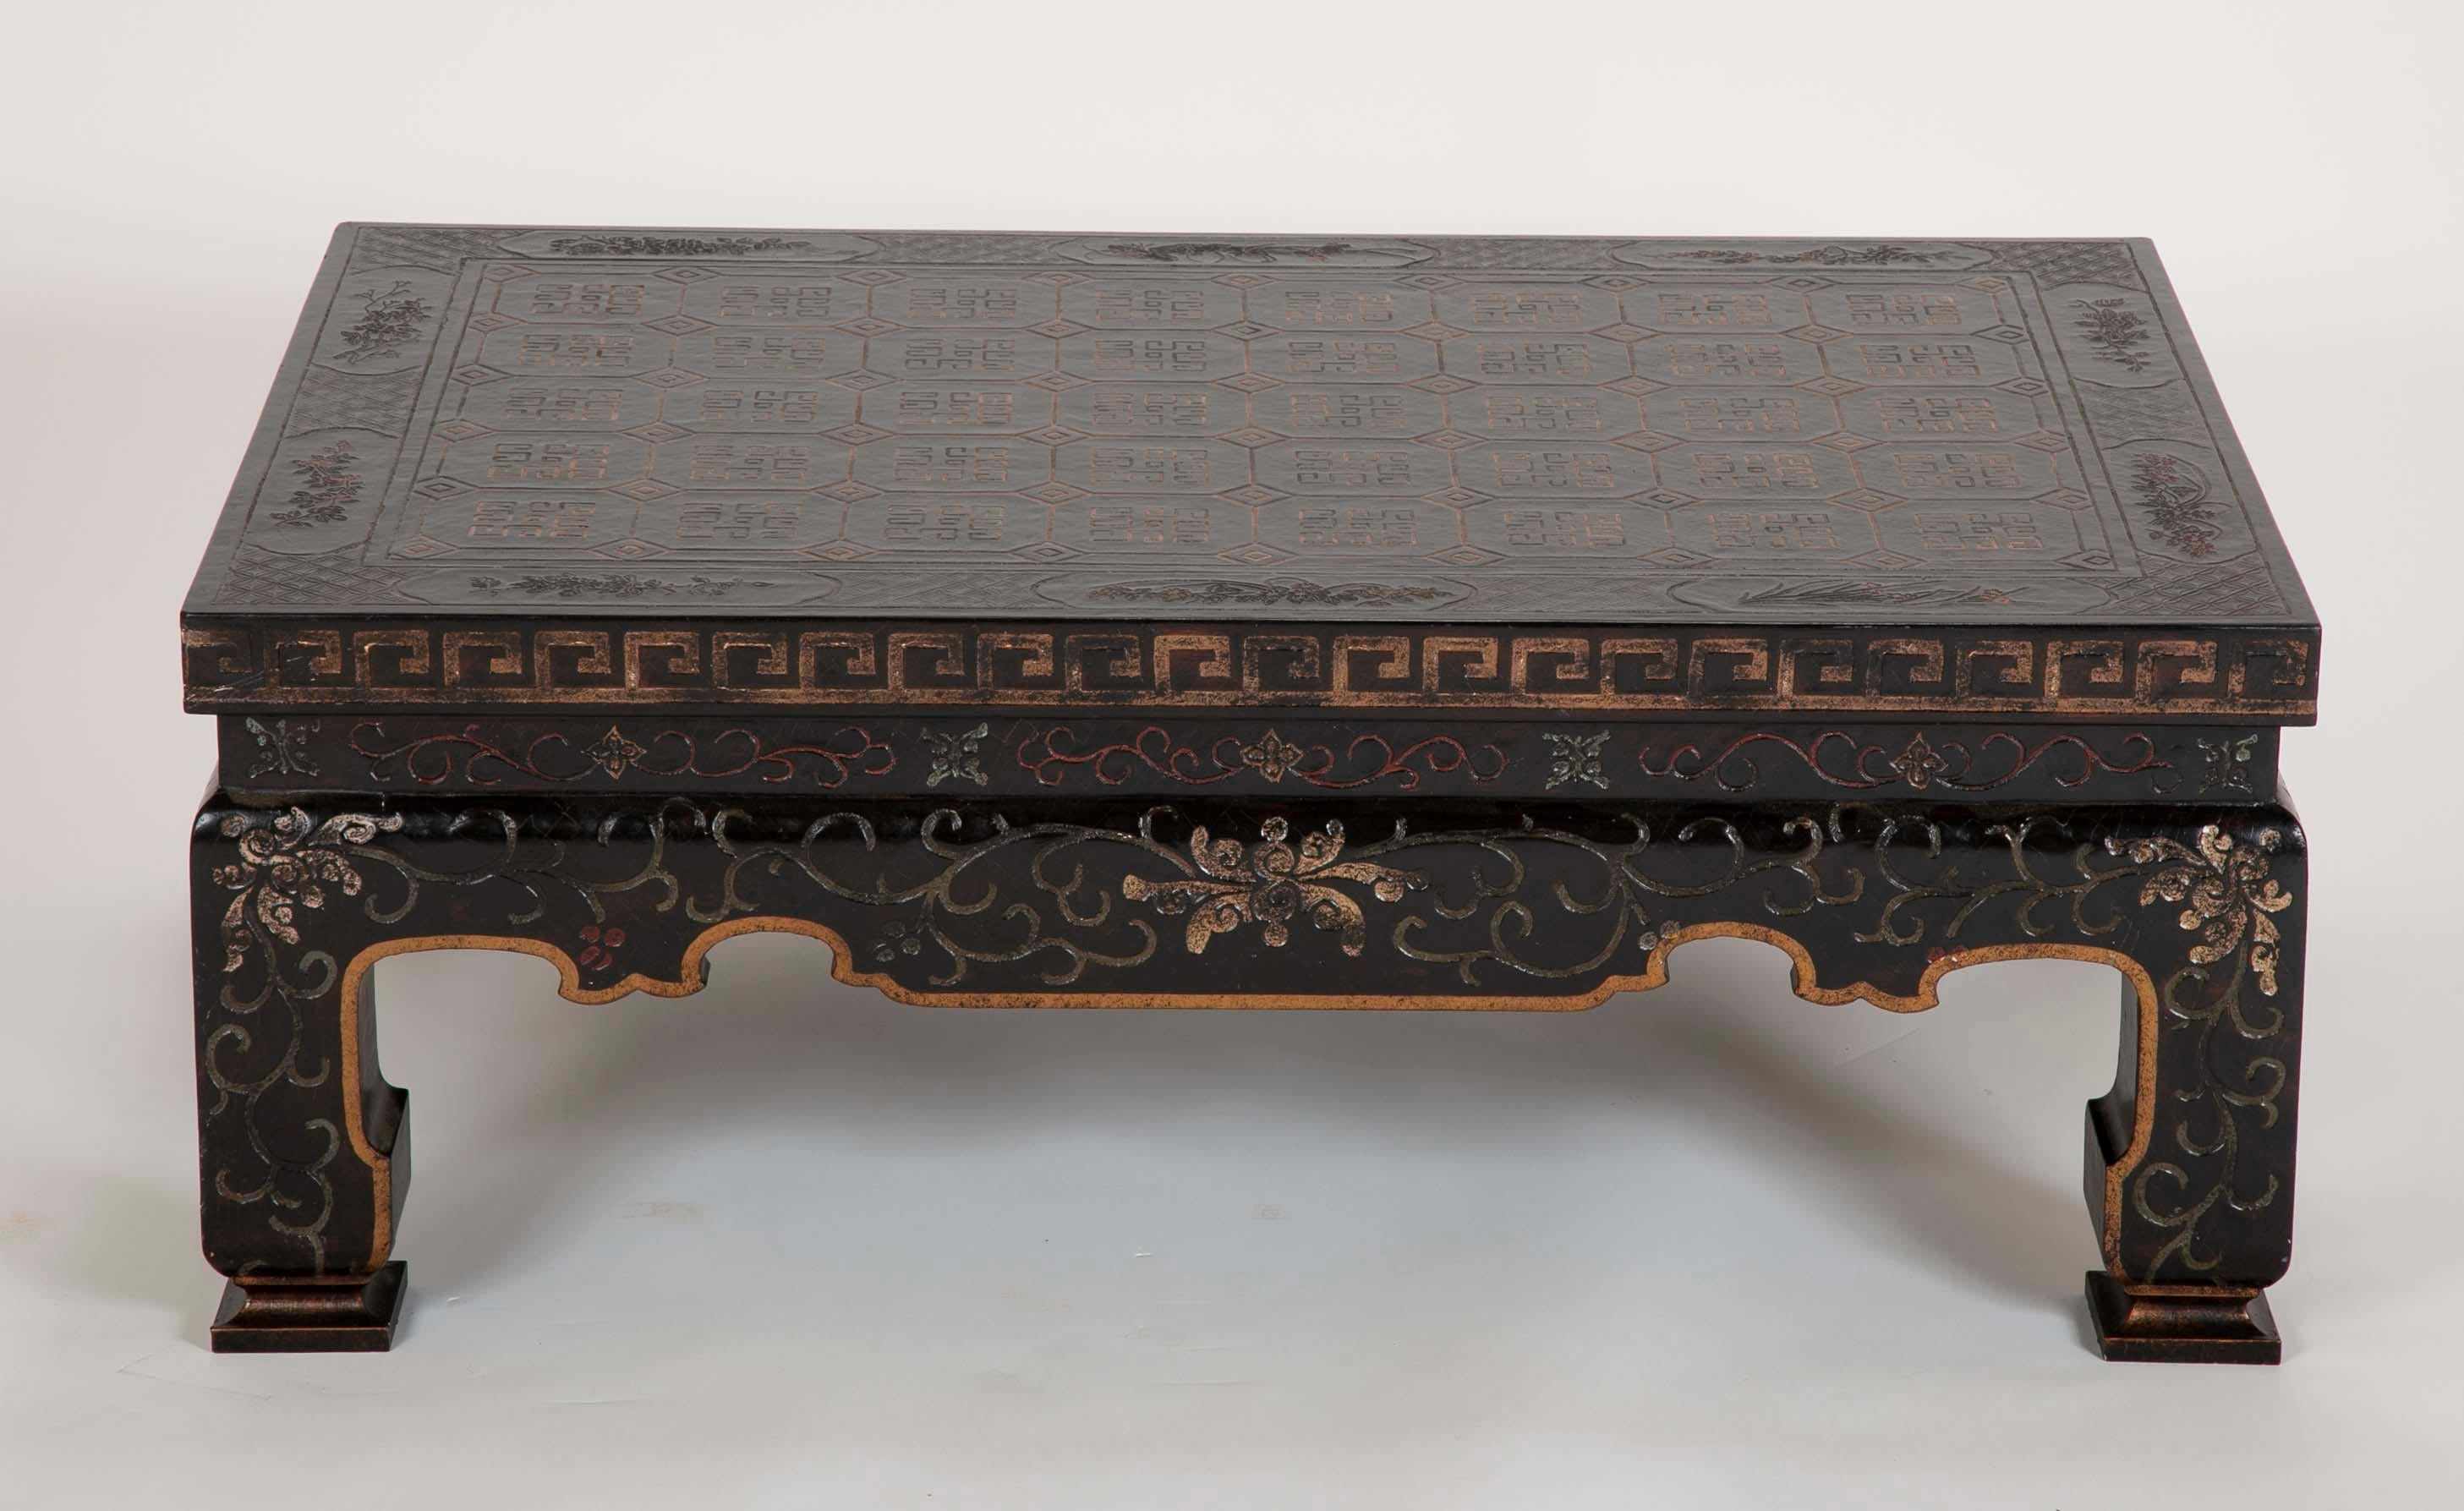 American Midcentury Black Lacquer and Gilt Coffee Table with Chinoiserie Decoration